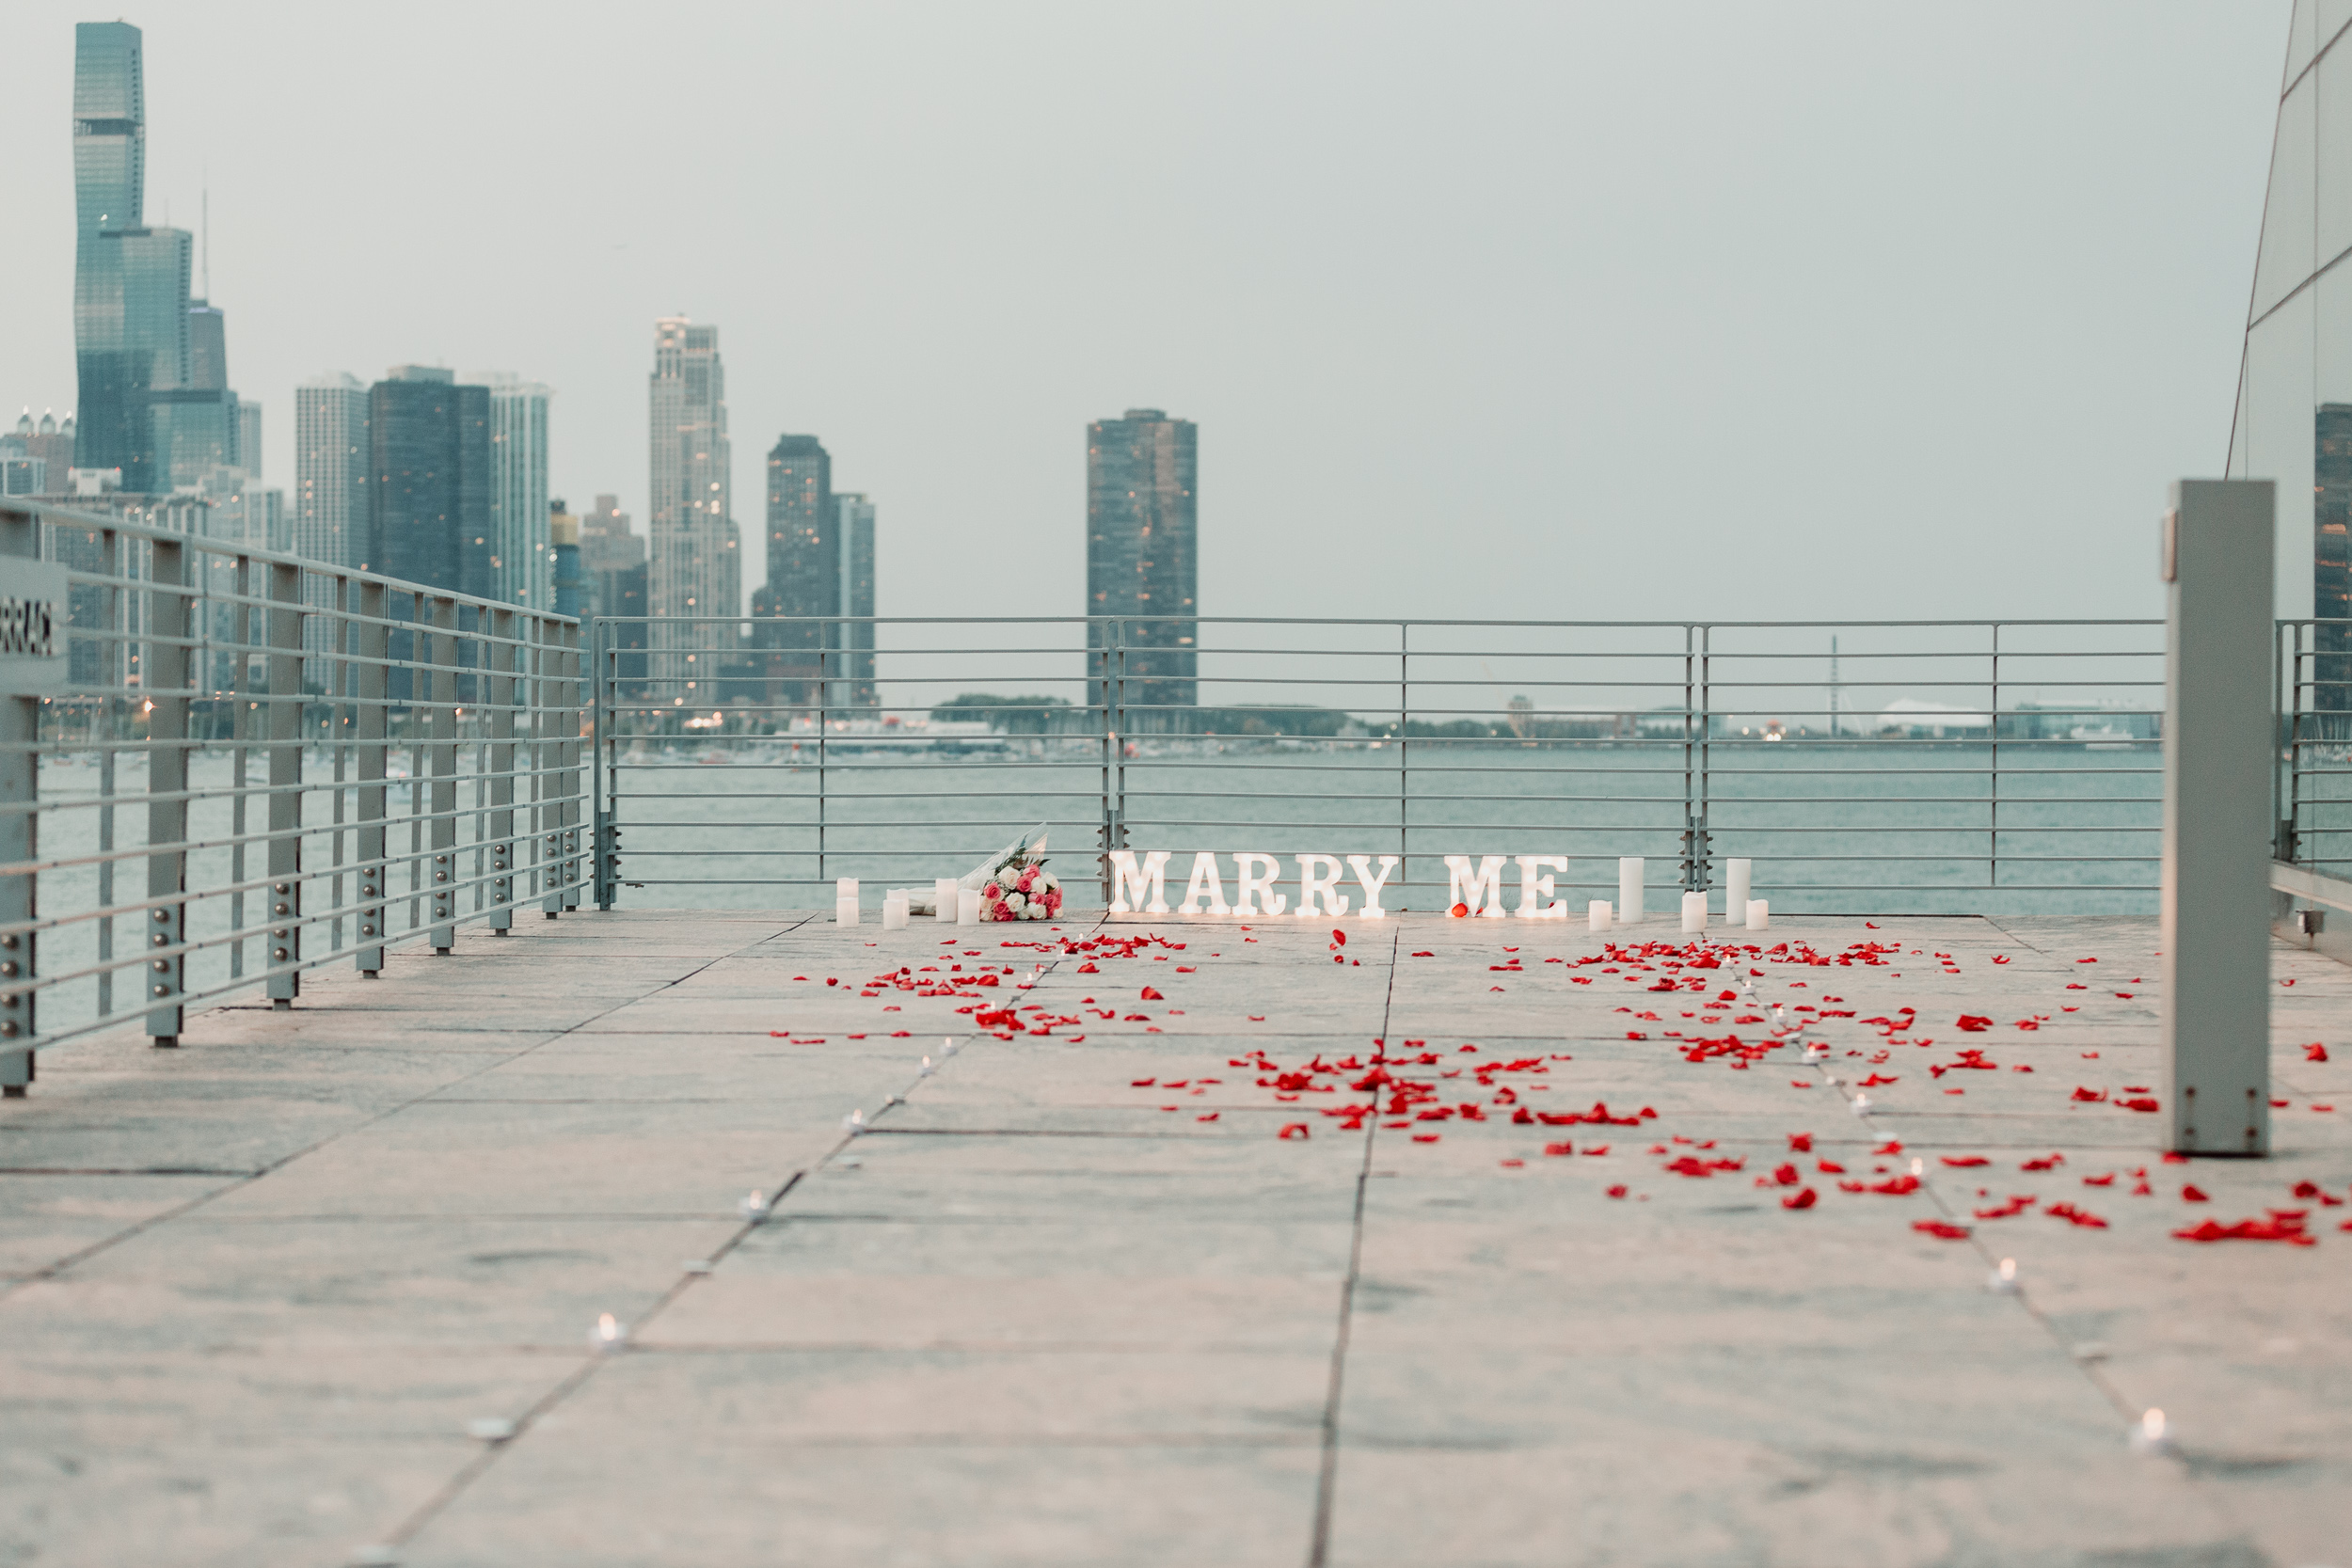 Rose petals leading up to marry me proposal sign | Chicago Skyline Proposal | Proposal Ideas | Chicago Engagement Photographer | Chicago Proposal Photographer | Chicago Proposal | Proposal Stories | How to Propose | She Said Yes | Engaged | Places to Get Engaged in Chicago